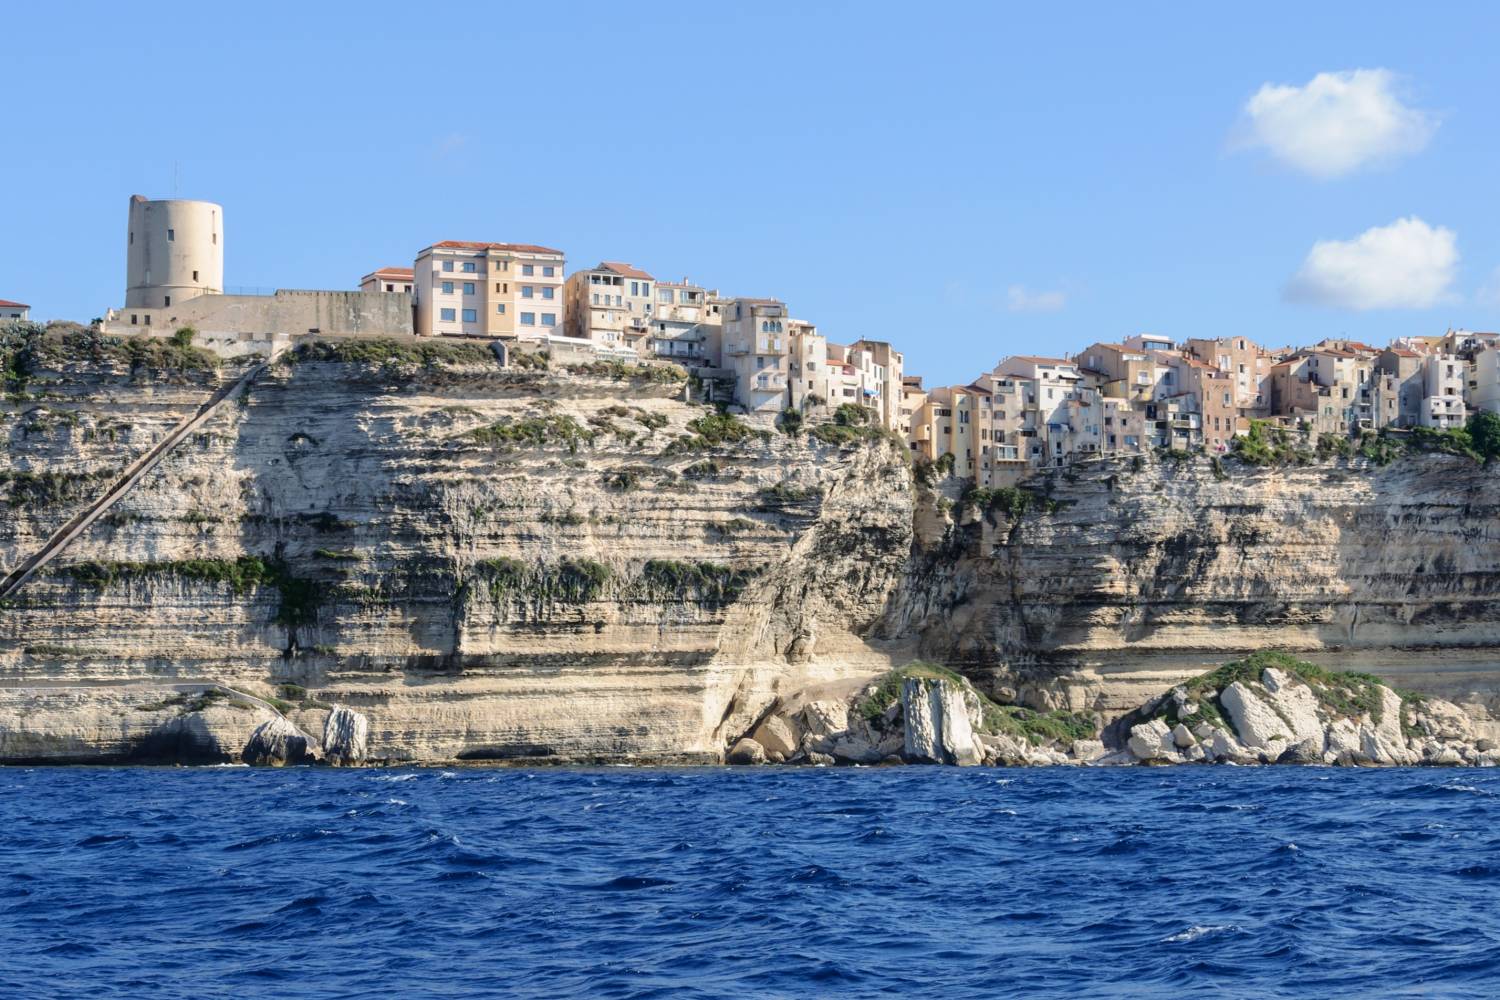 Enjoy a private chef after an amazing day in Bonifacio - Take a Chef